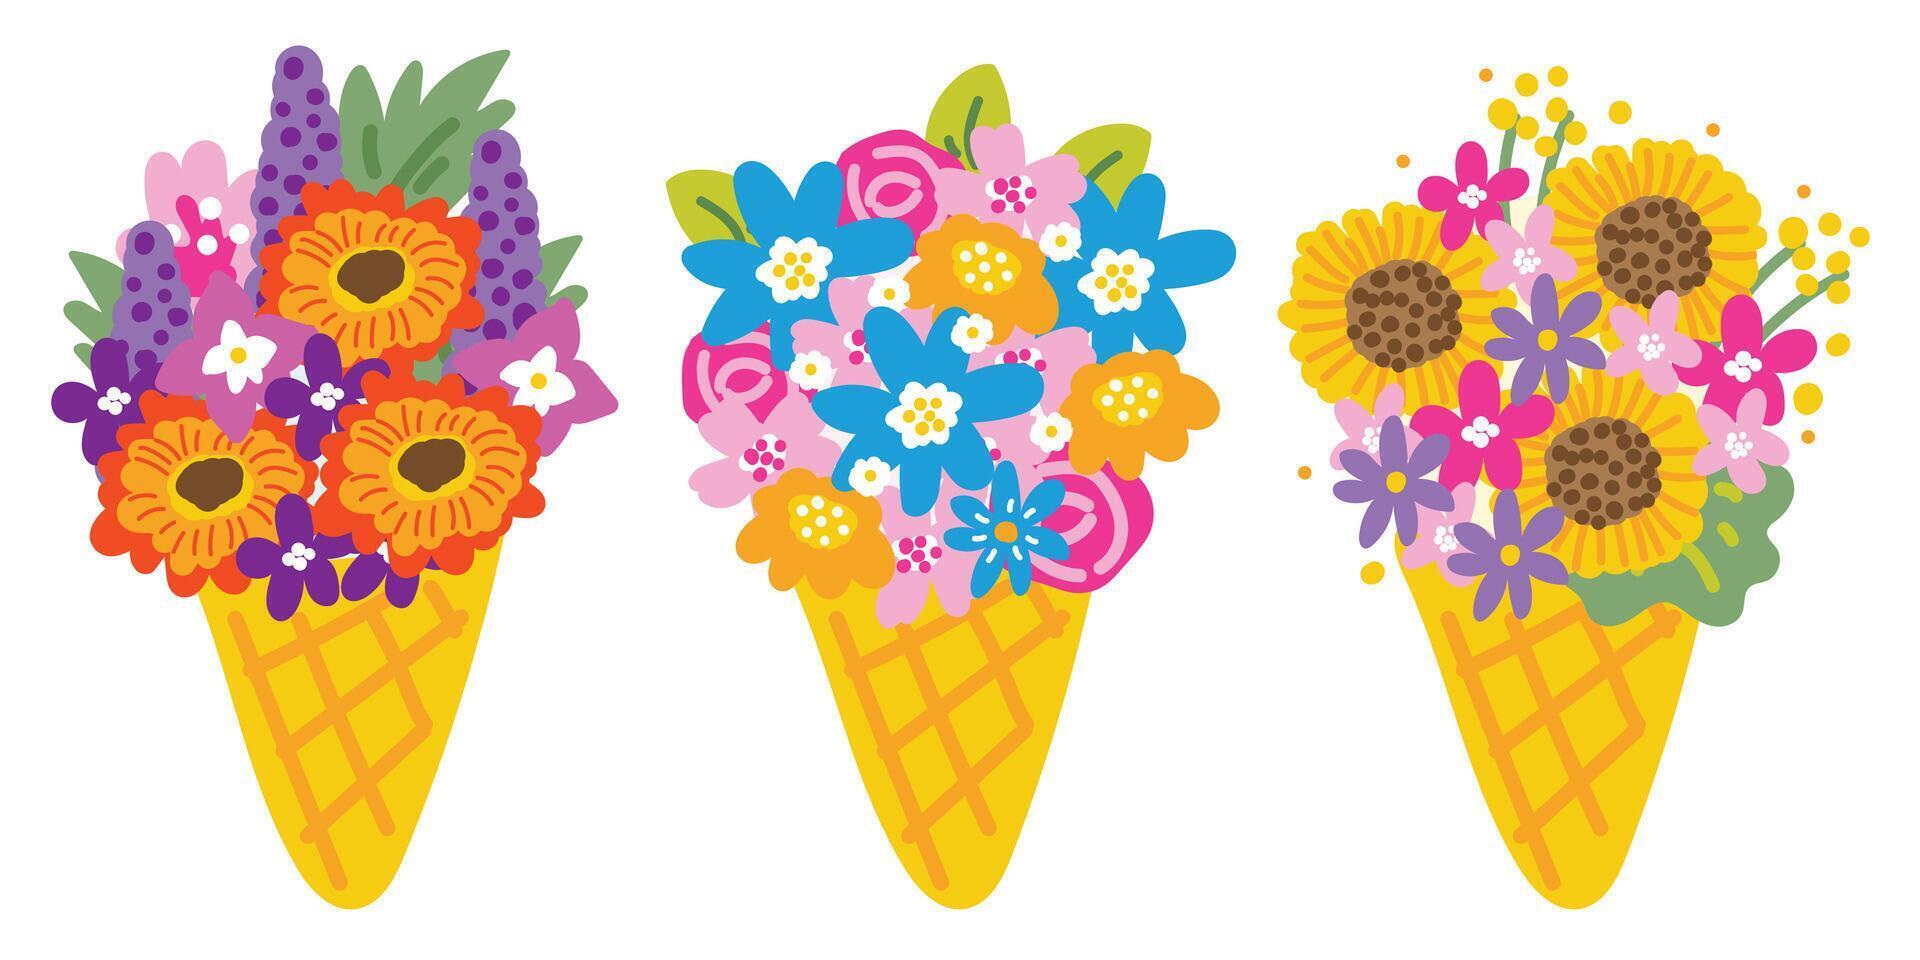 Set of cute various flower on ice cream cone hand drawn.Dessert and sweet collection.Floral.Nature.Spring.Blooming.Image for card,poster,marriage.Kawaii.Vector.Illustration. vector